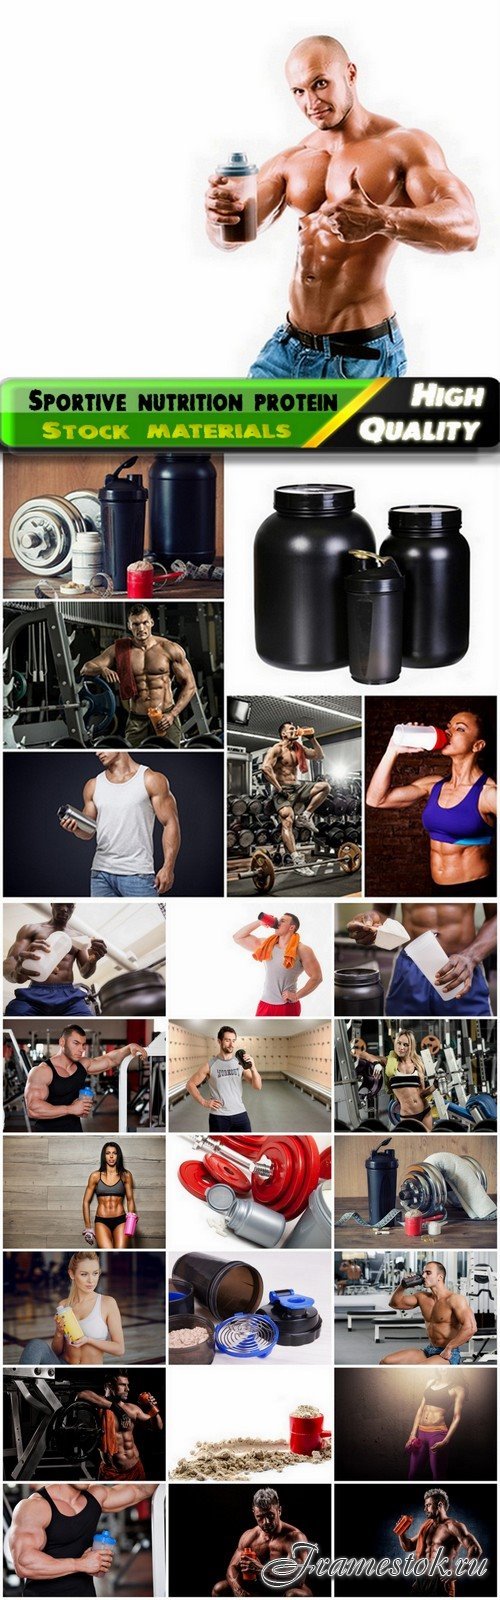 Gym and drink sportive nutrition protein of shaker - 25 HQ Jpg